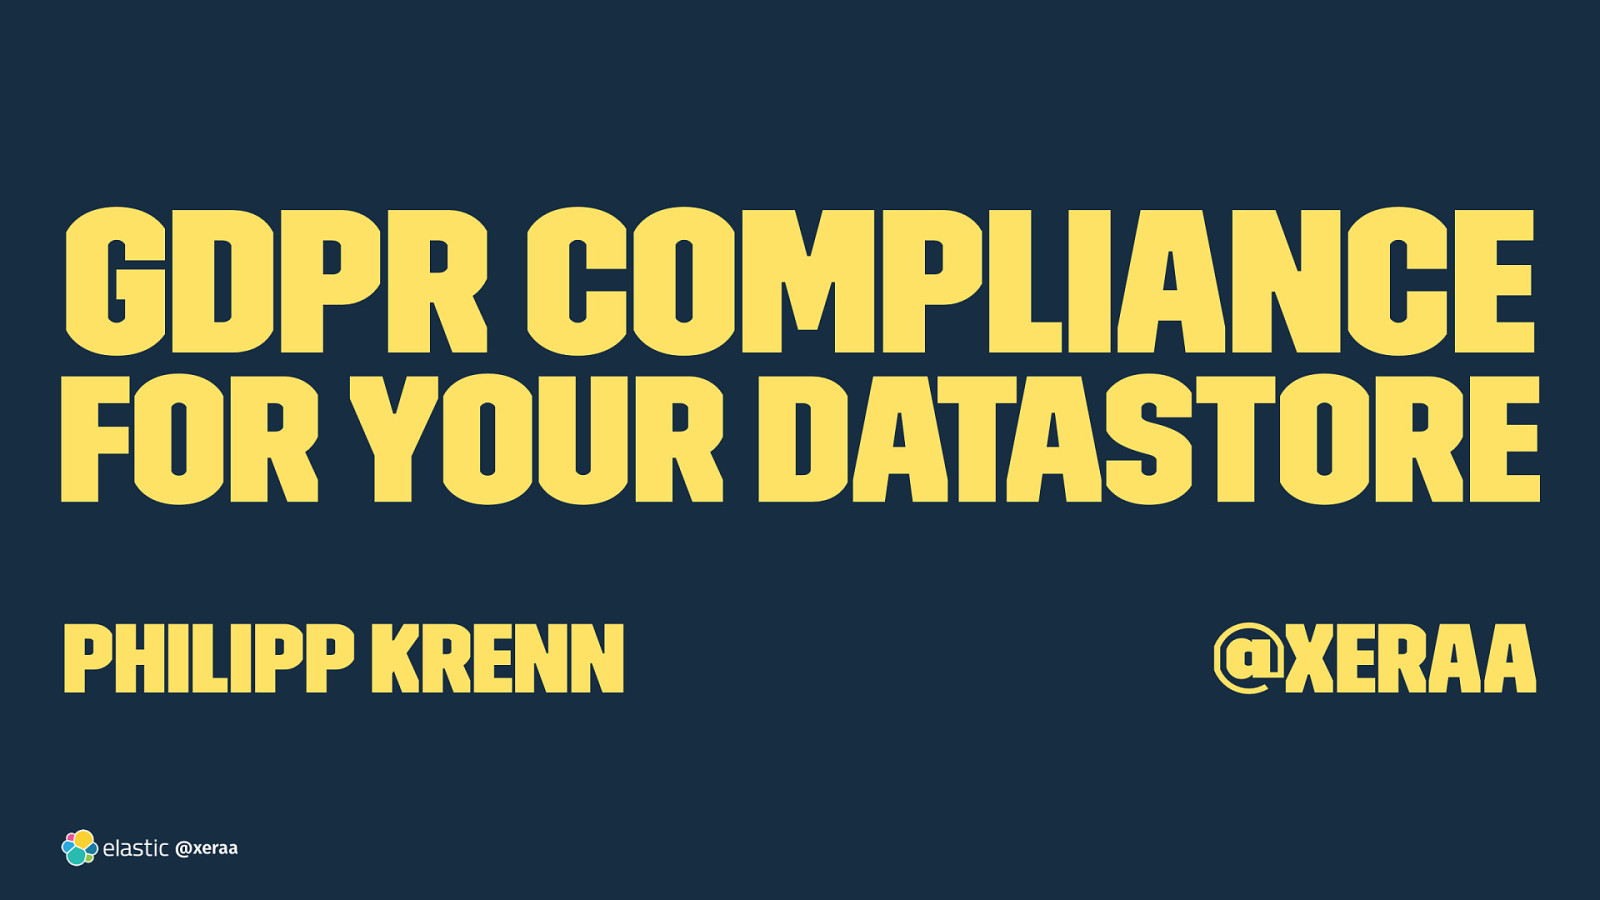 GDPR Compliance for Your Datastore